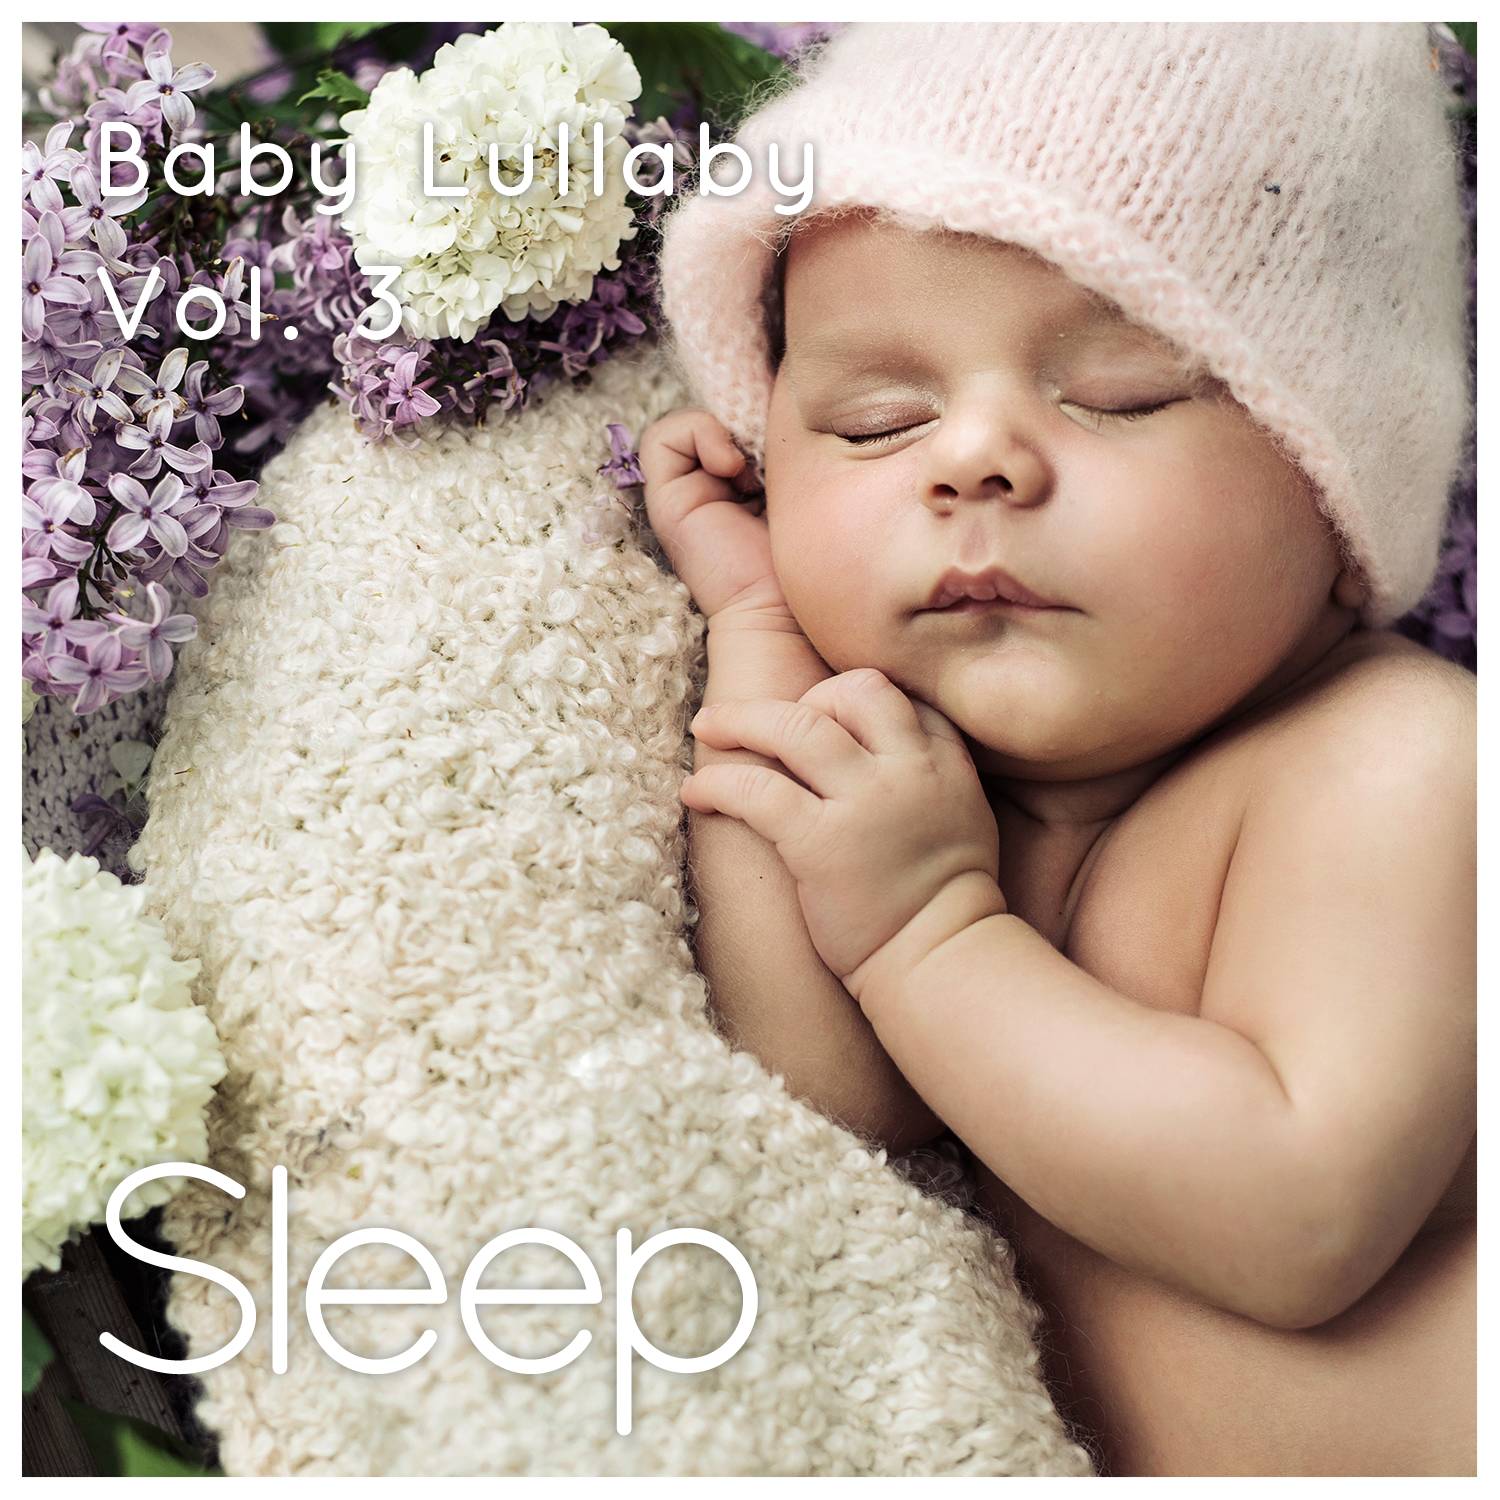 Baby Sleep Ambient Lullaby, Pt. 13